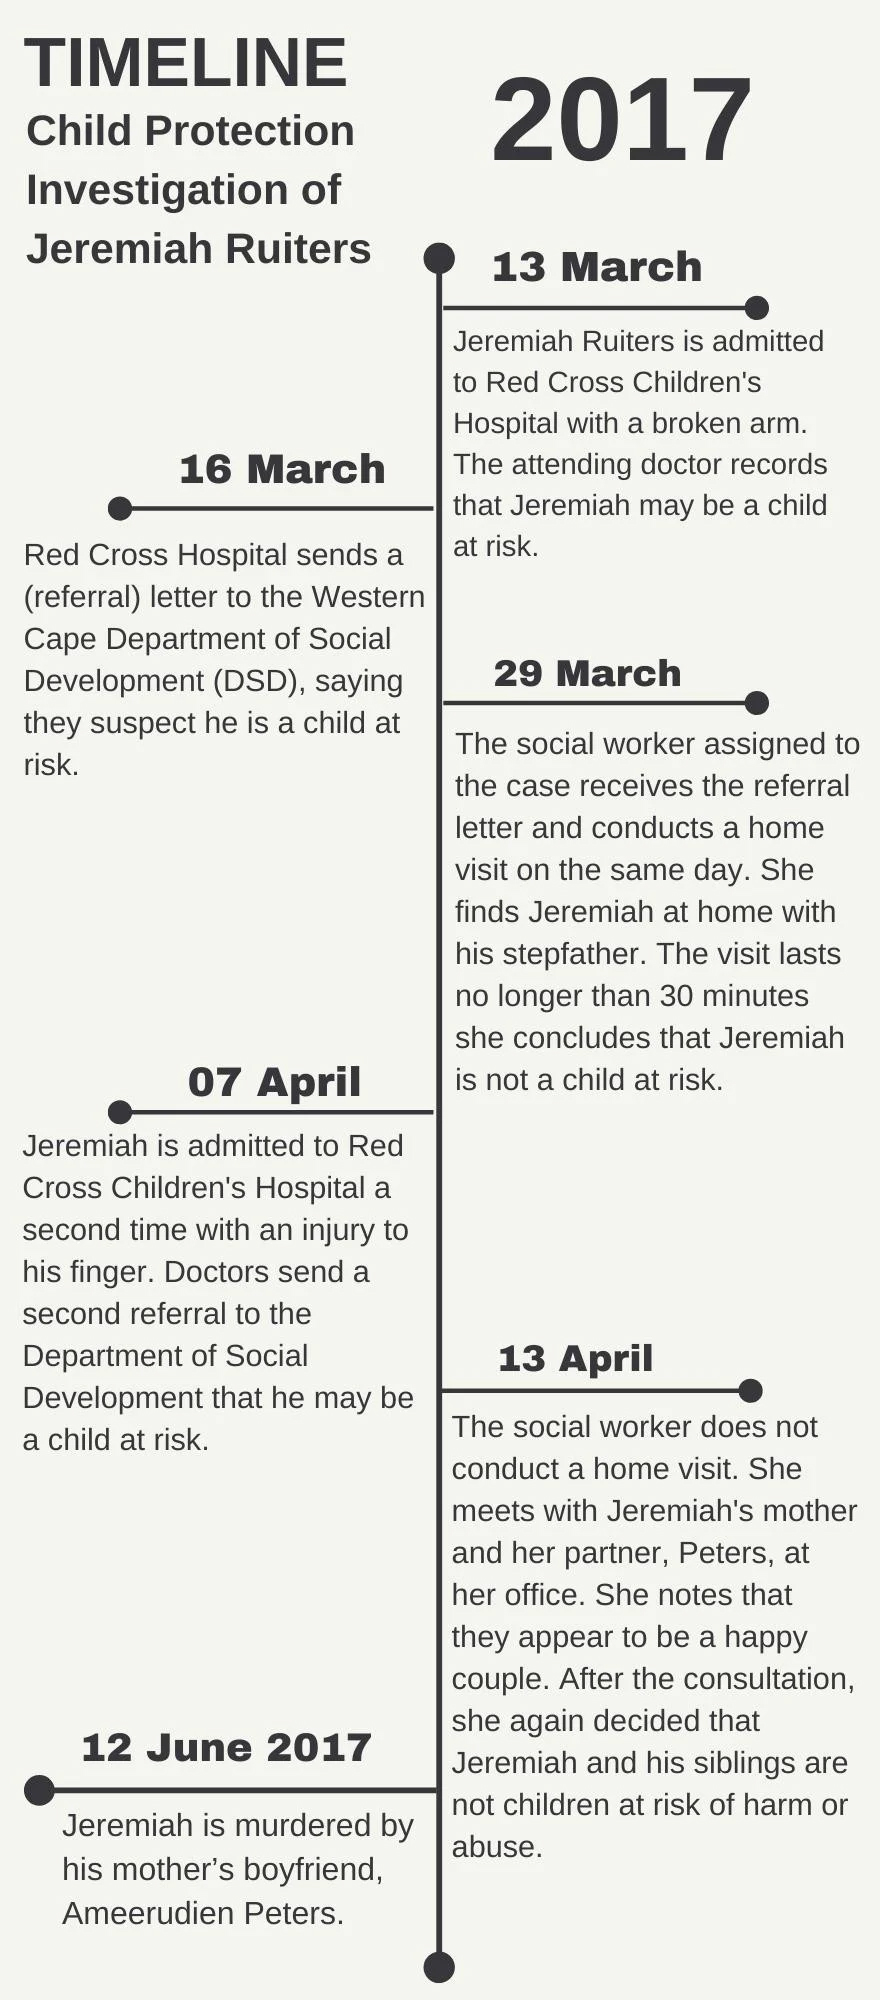 A timeline graphic detailing the Child Protection Investigation of Jeremiah Ruiters.